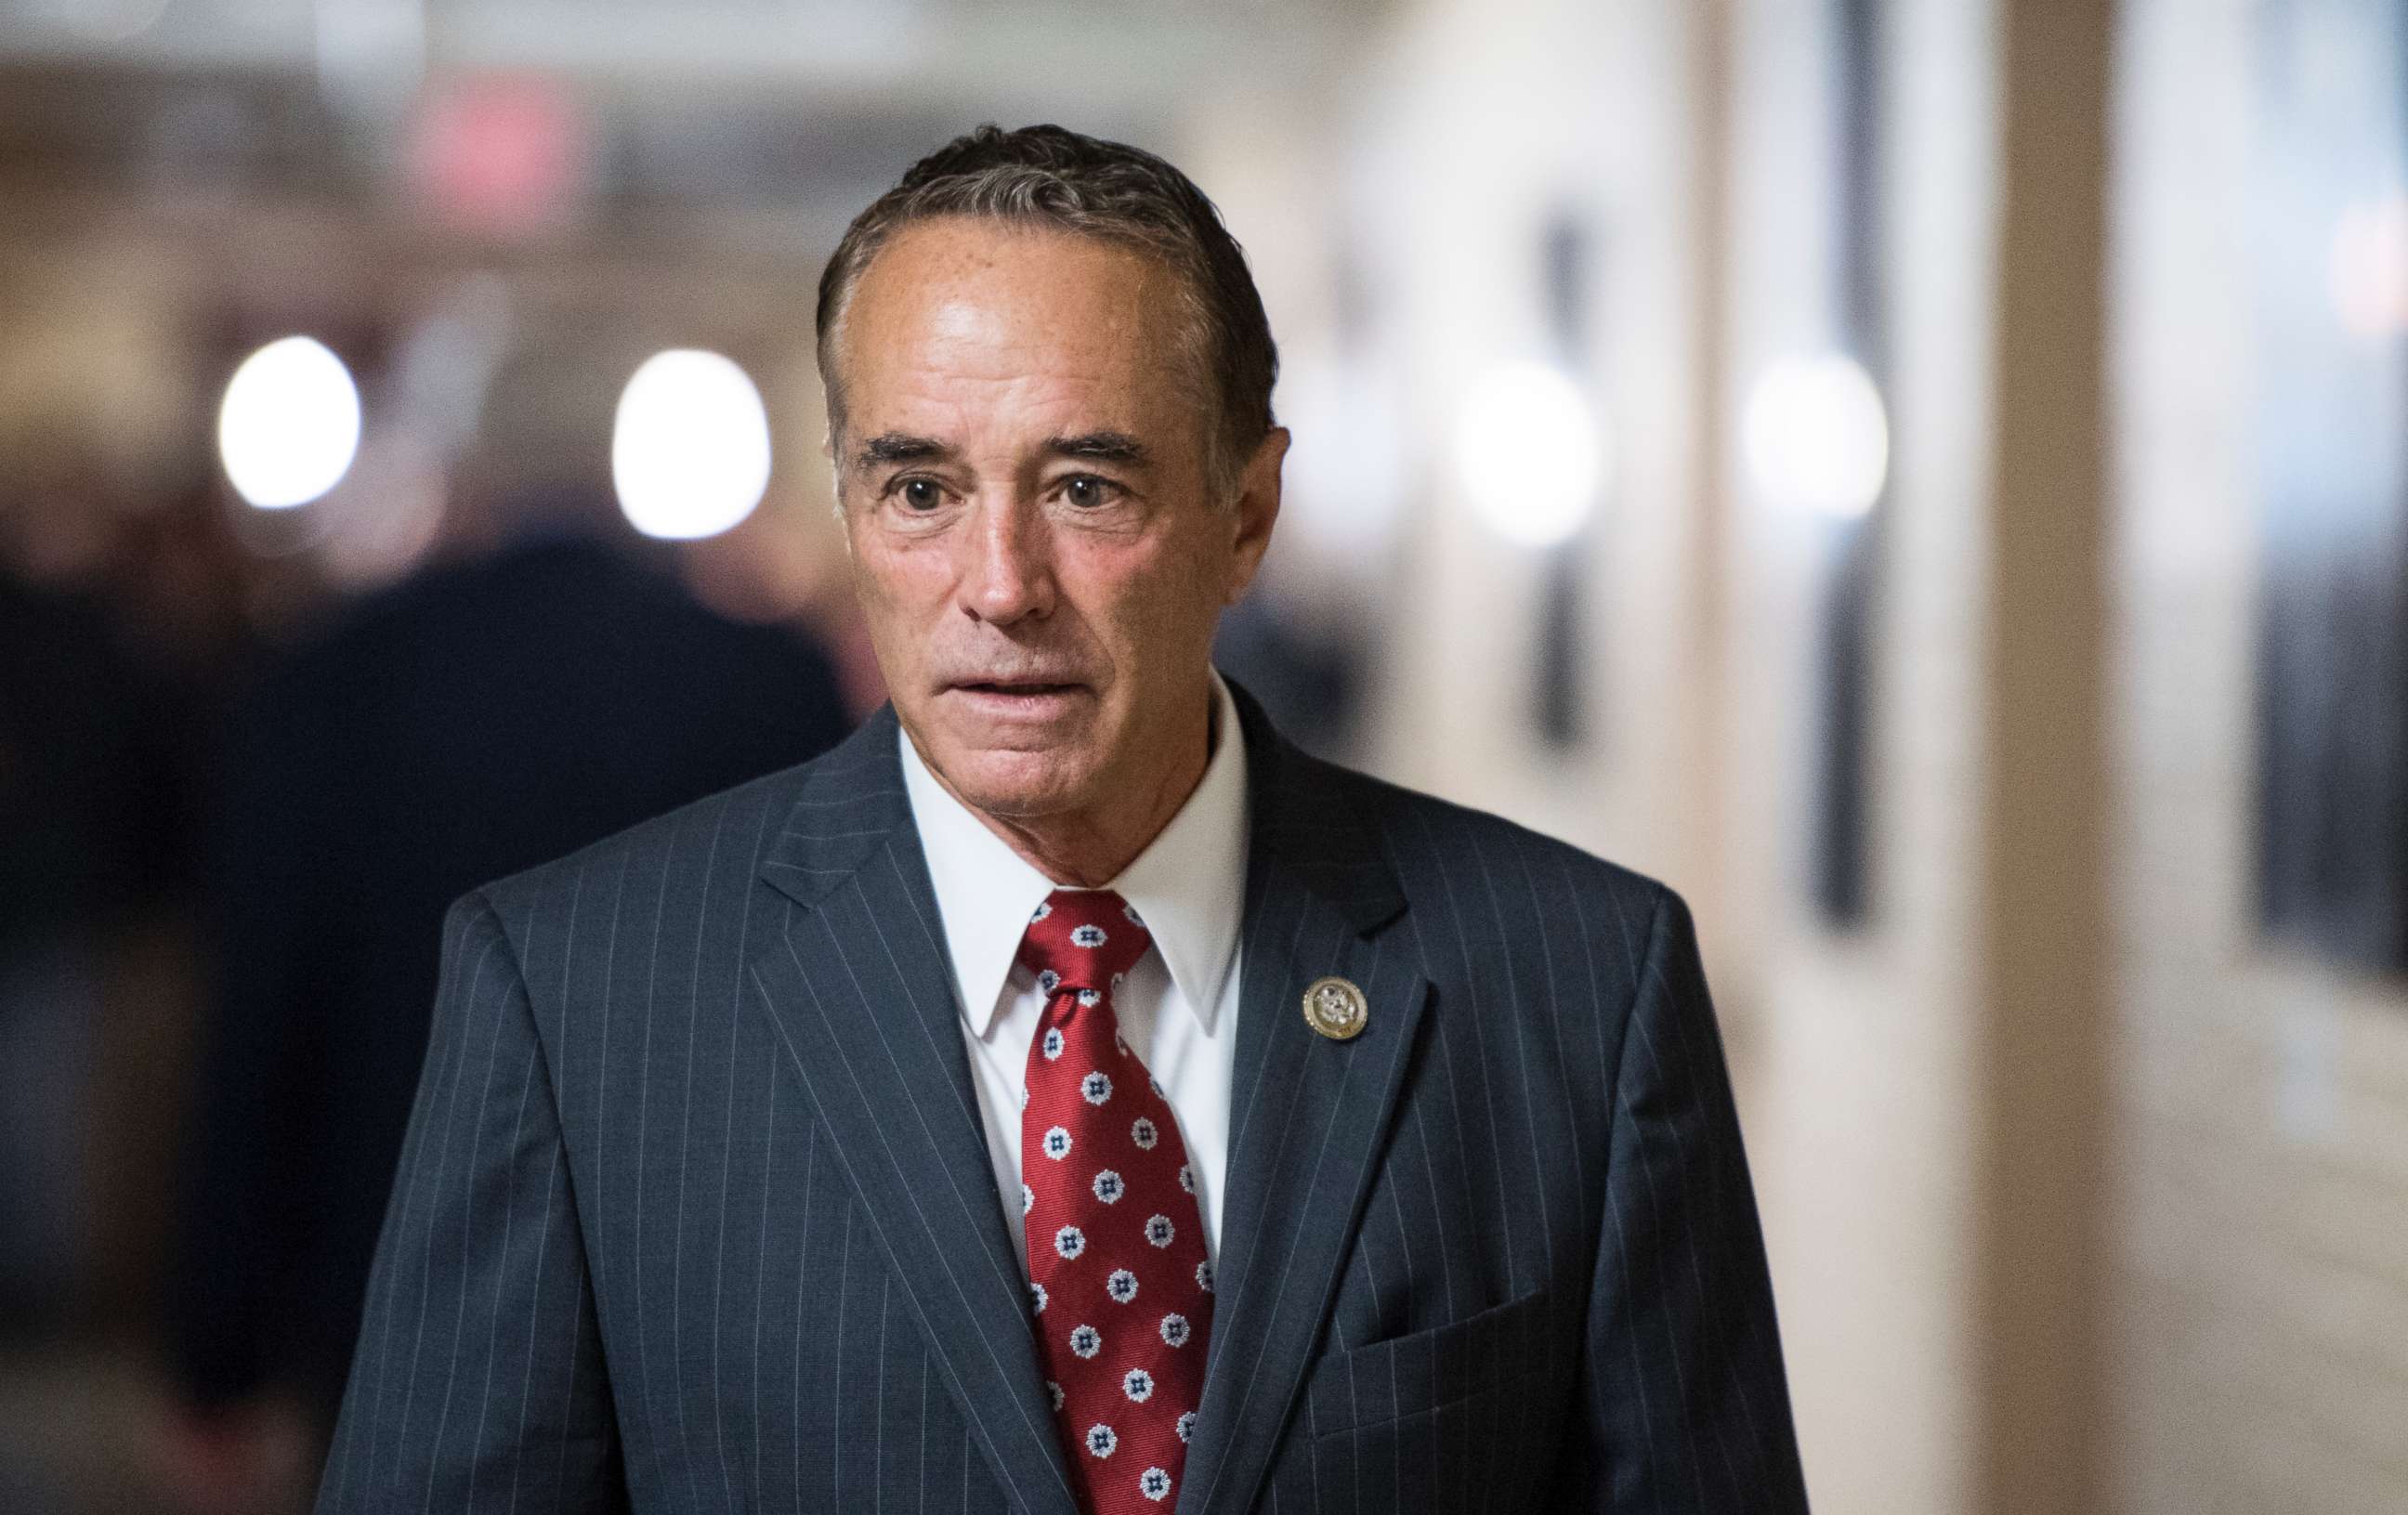 PHOTO: Rep. Chris Collins leaves the House Republican Conference meeting in the Capitol on June 20, 2018.